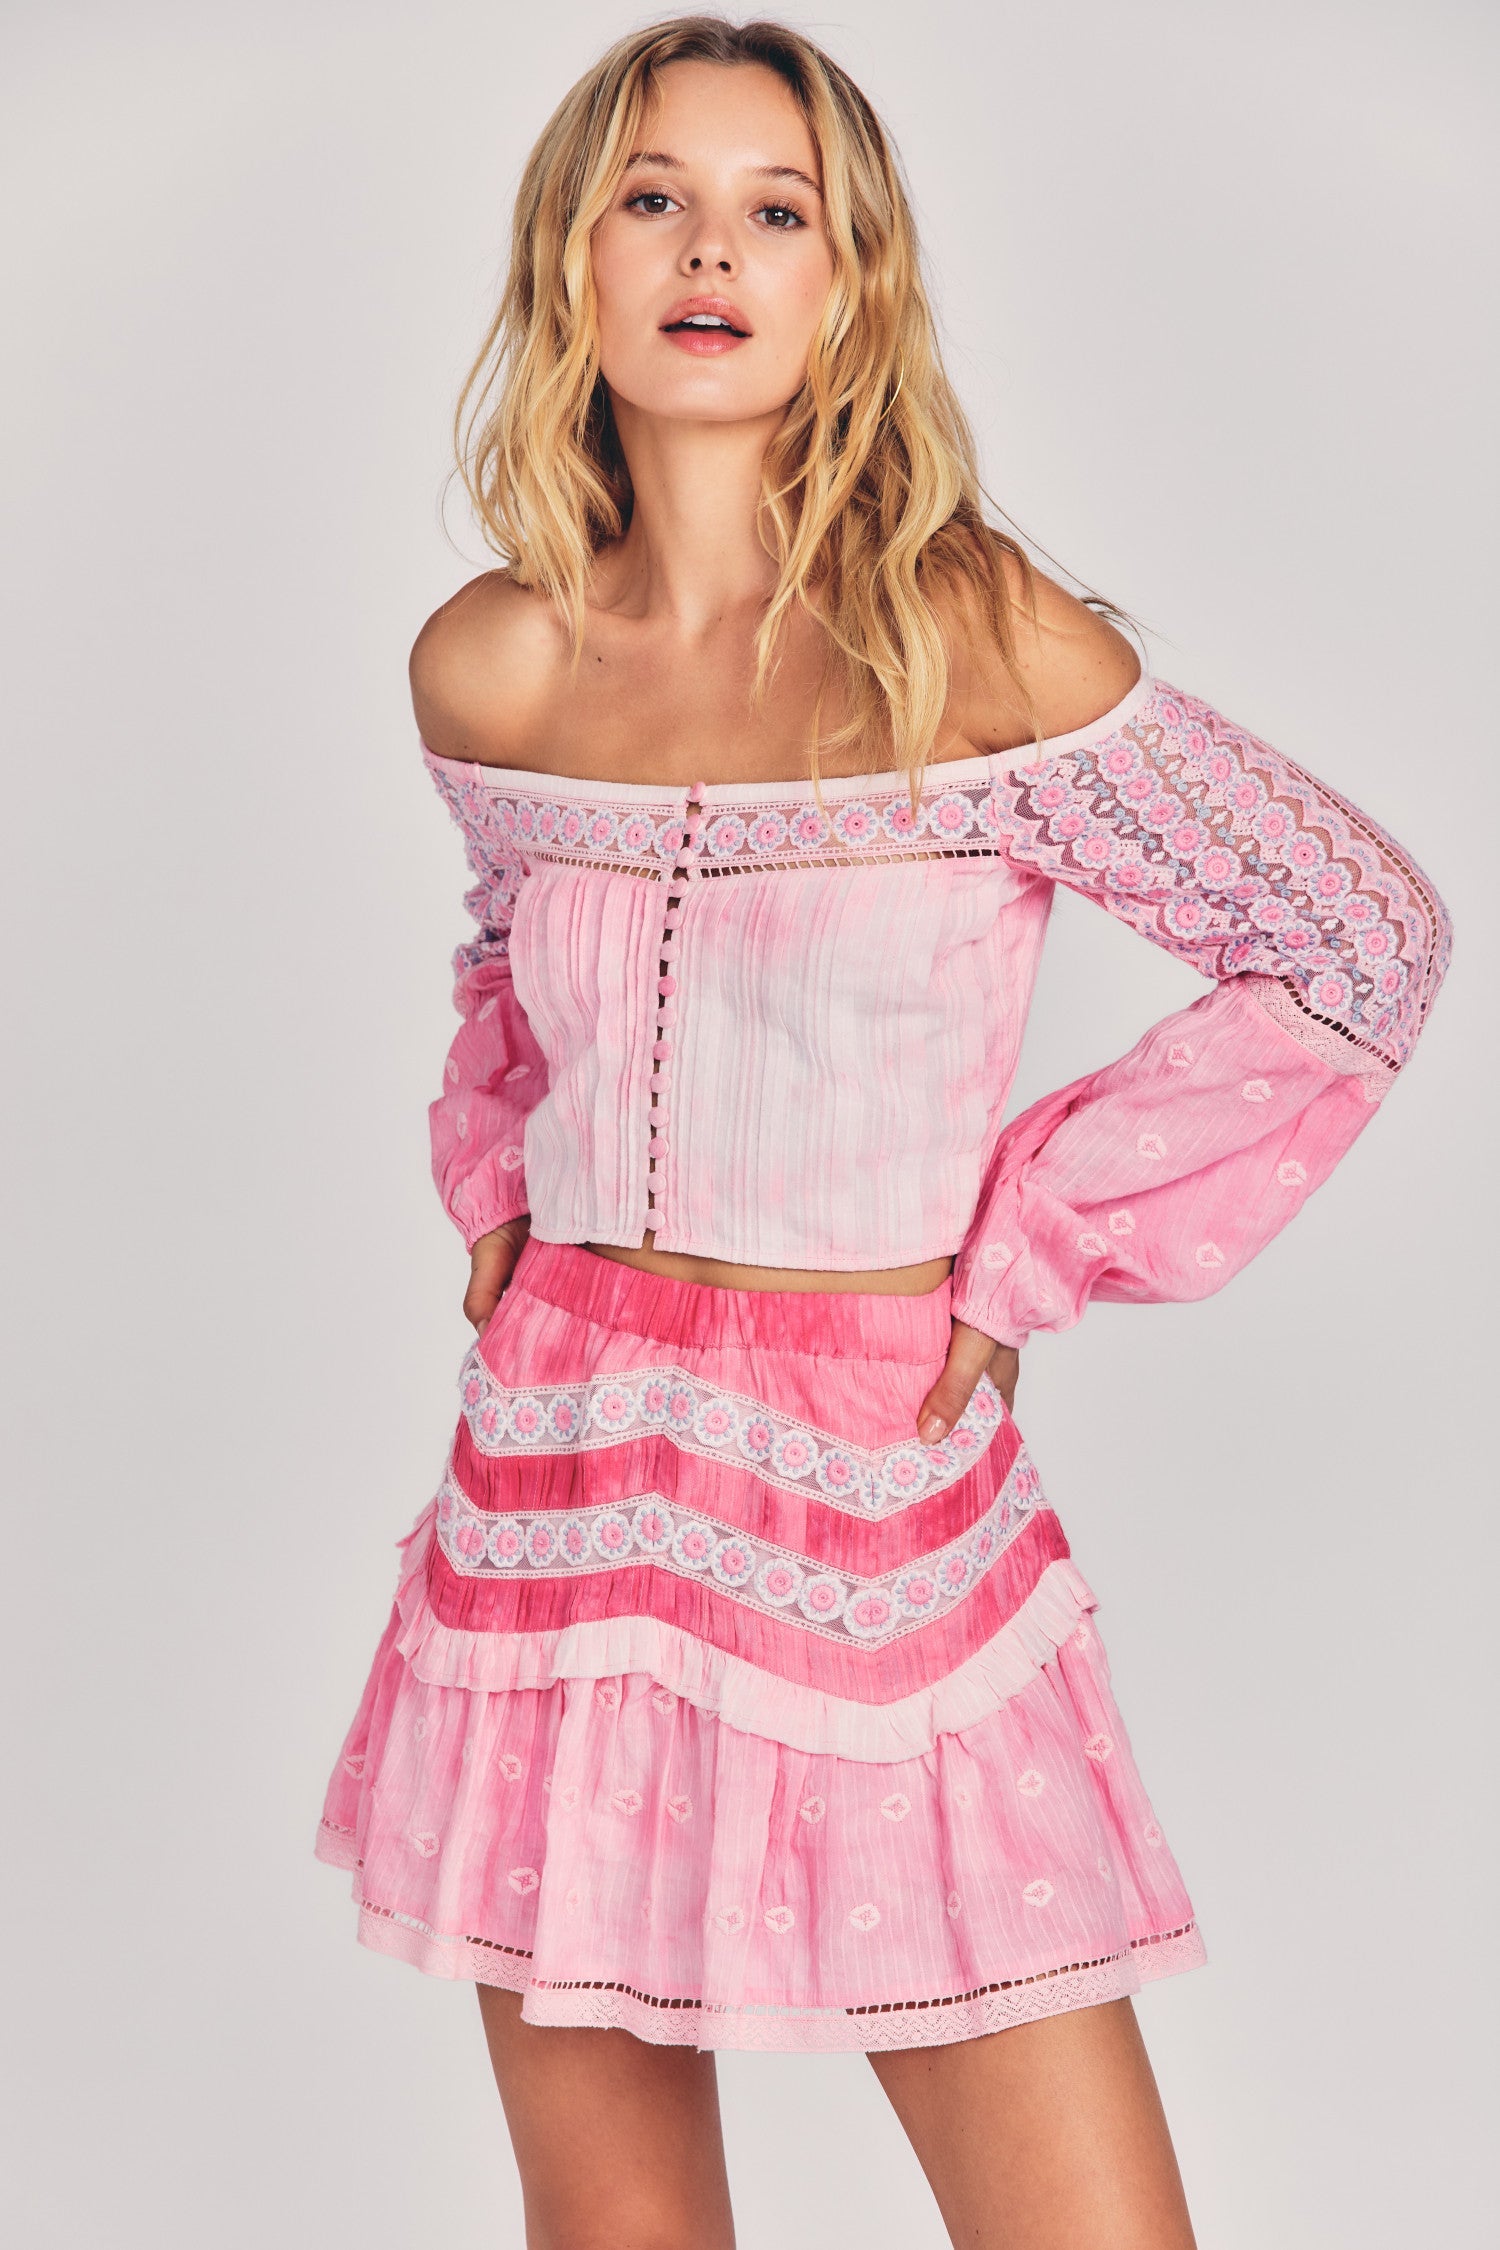 Womens pink mini skirt with lace trim and embroidery details